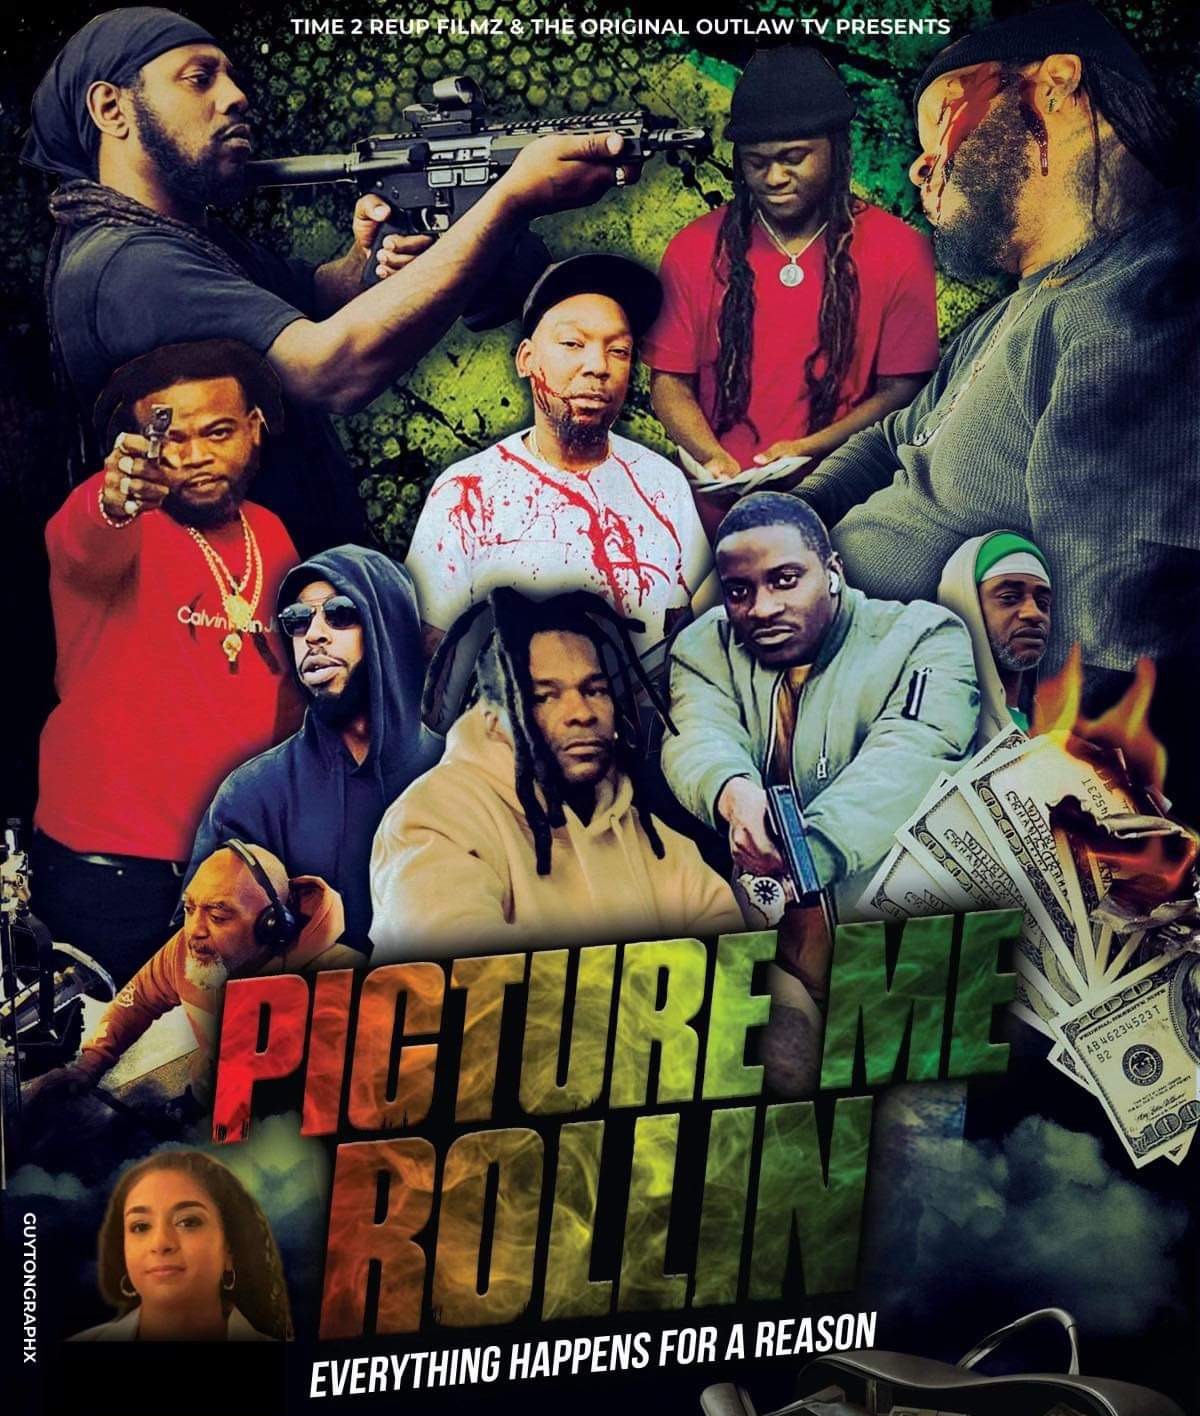 Picture me Roll'n